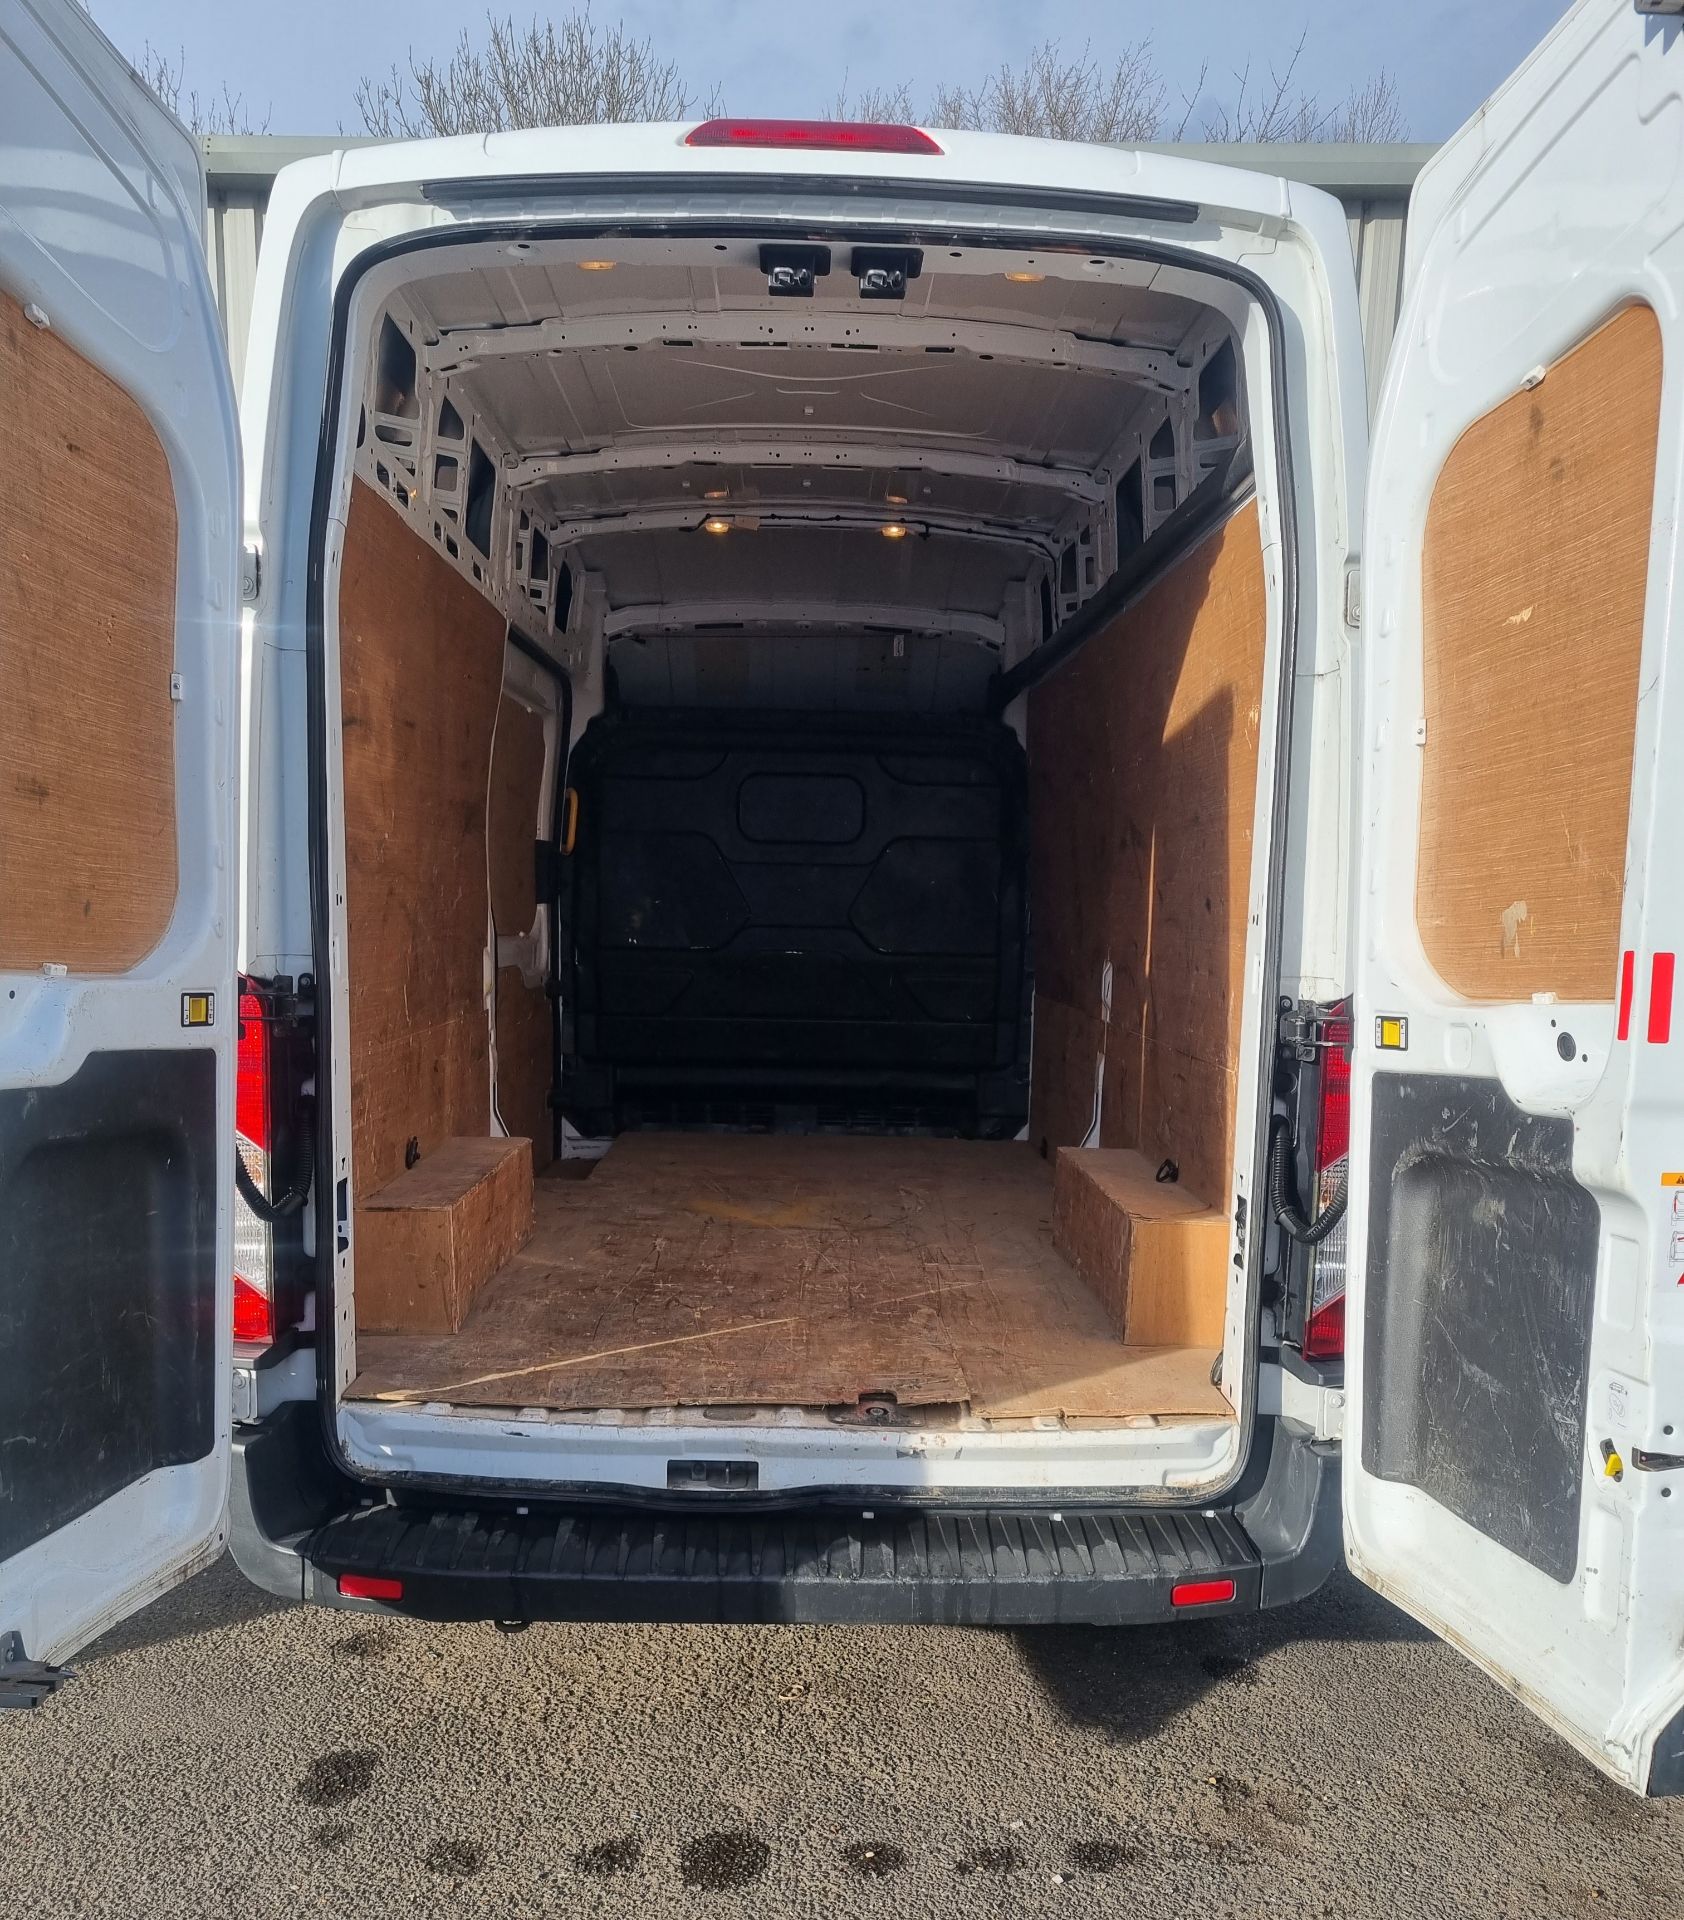 2019 FORD TRANSIT PANEL VAN - 99,507 MILES - SERVICED REGULARLY - READY FOR WORK - Image 3 of 8